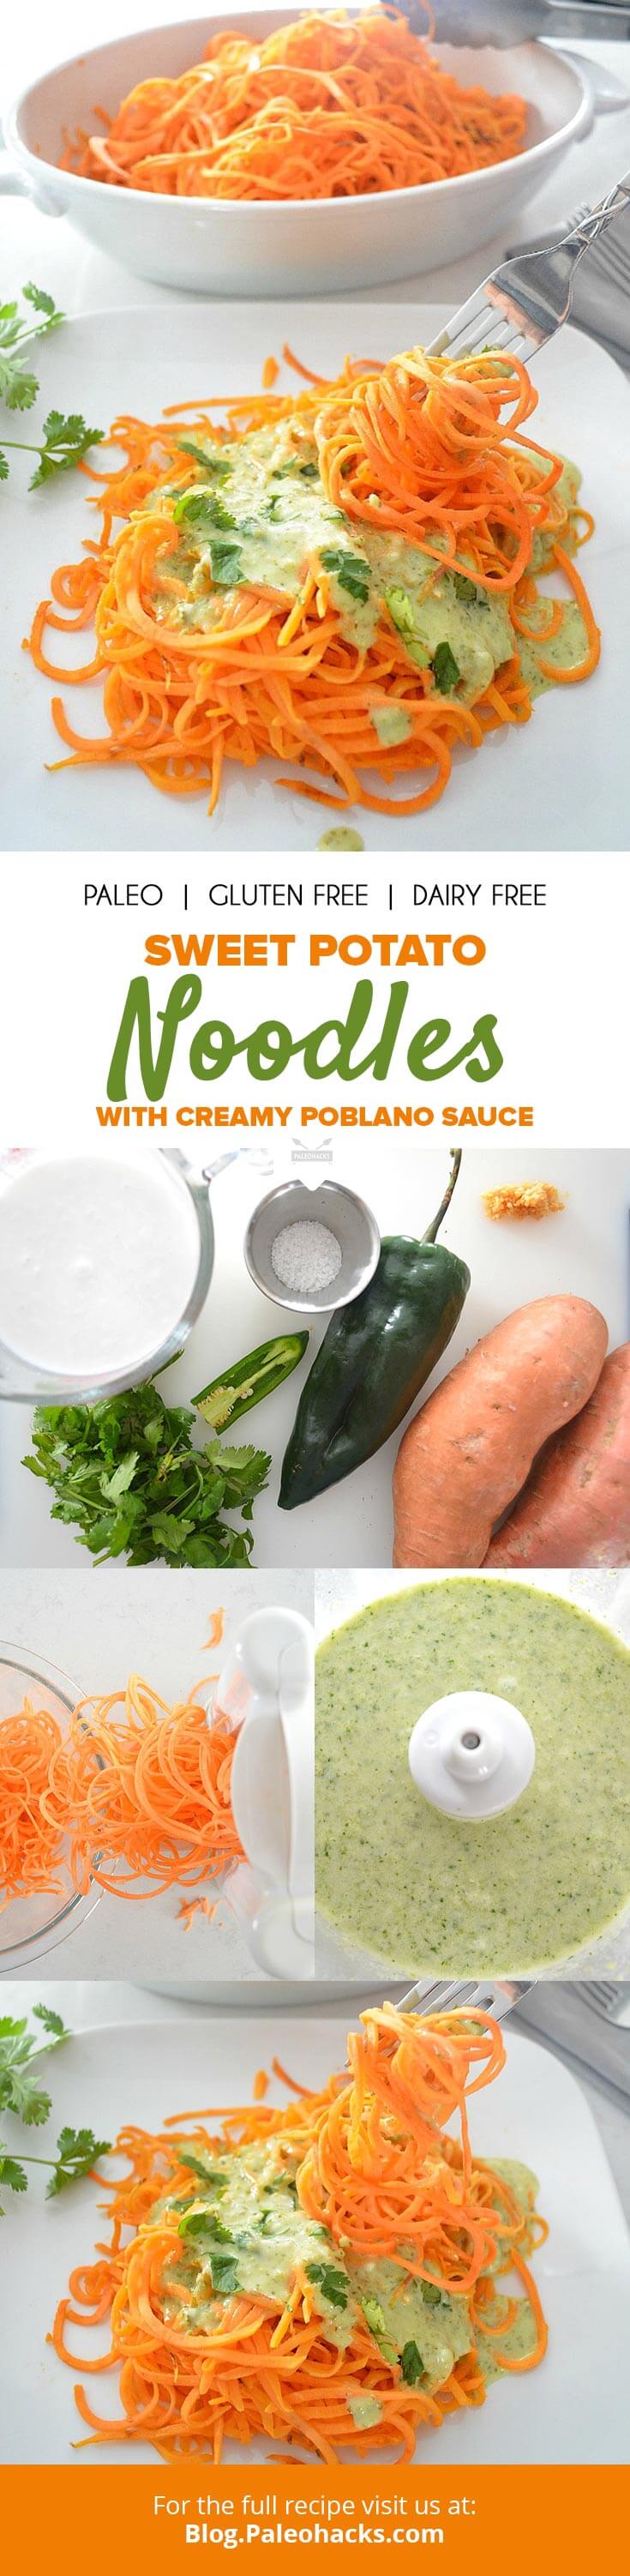 These easy-to-make delicious sweet potato noodles are topped with a creamy poblano sauce. This dish would be terrific served with grilled chicken for dinner